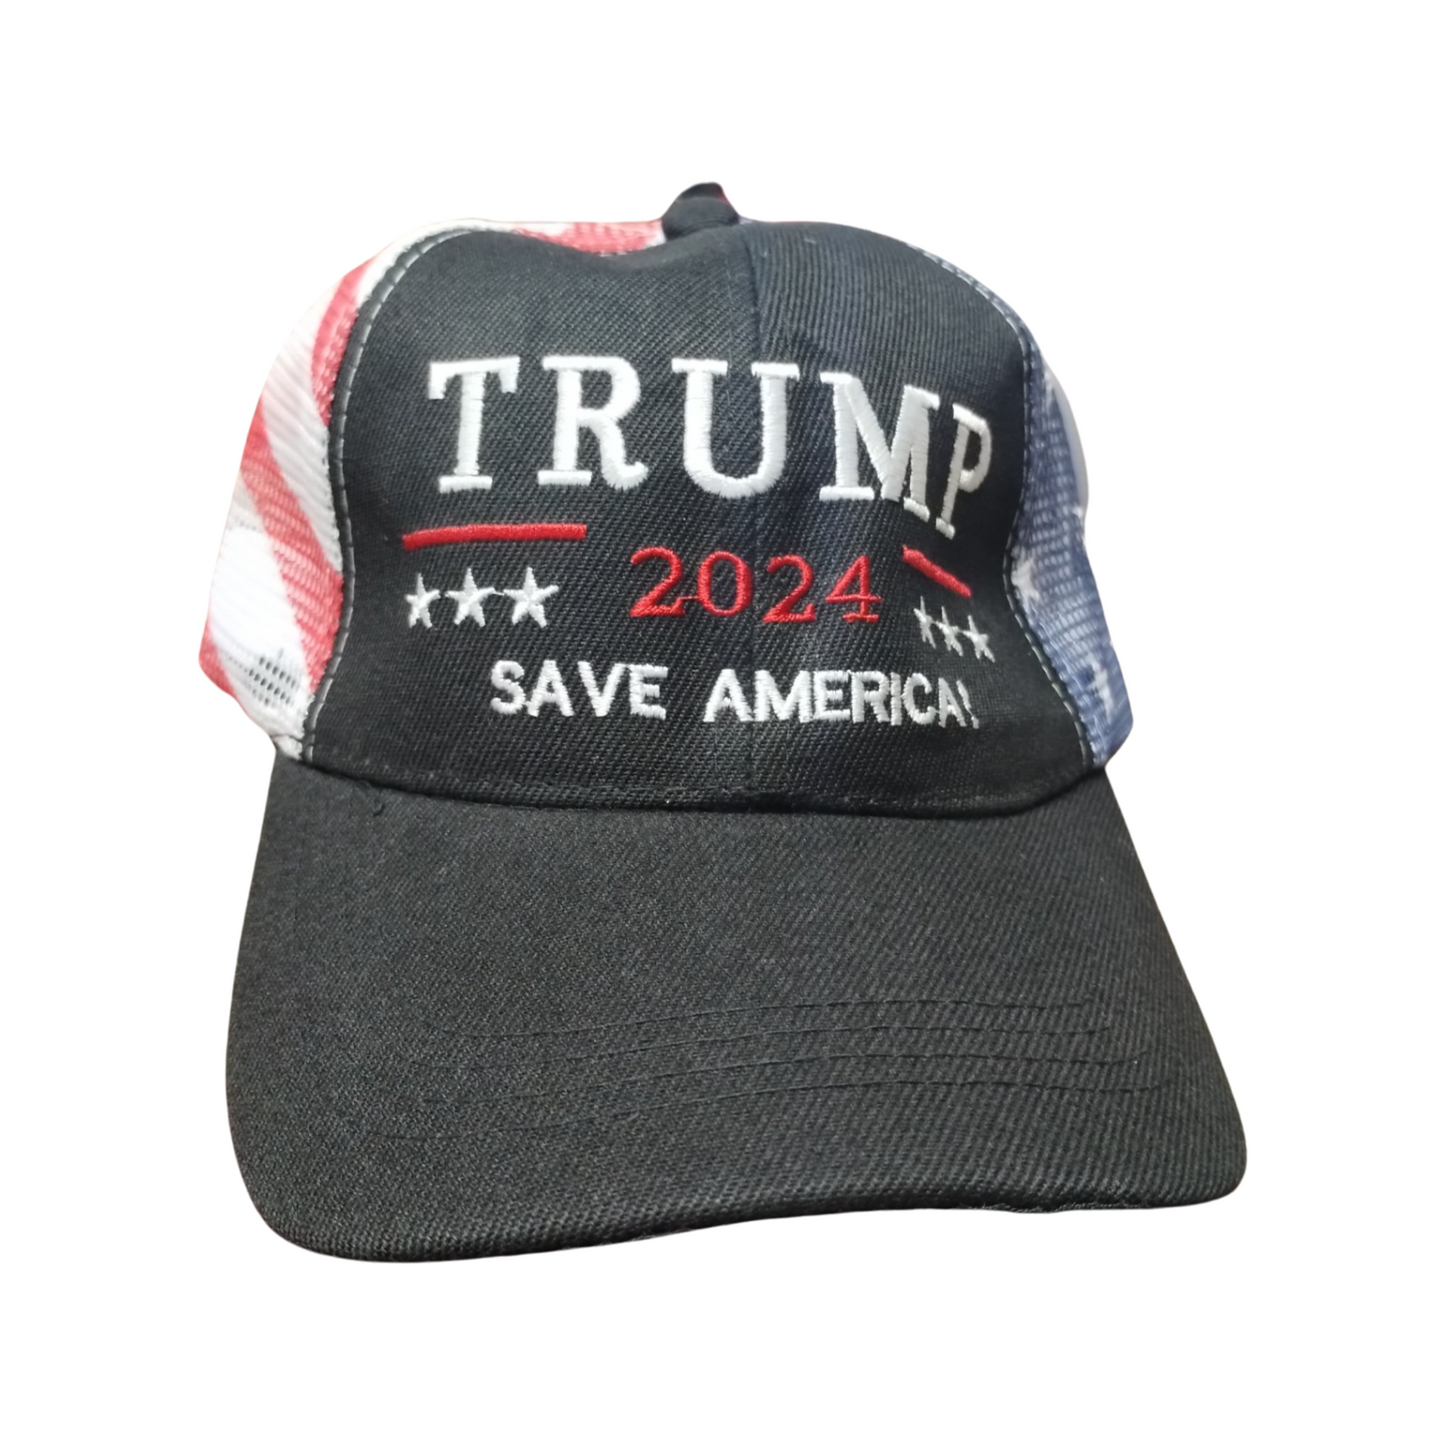 "Trump 2024 Save America Baseball Cap - Support for the 45th President"